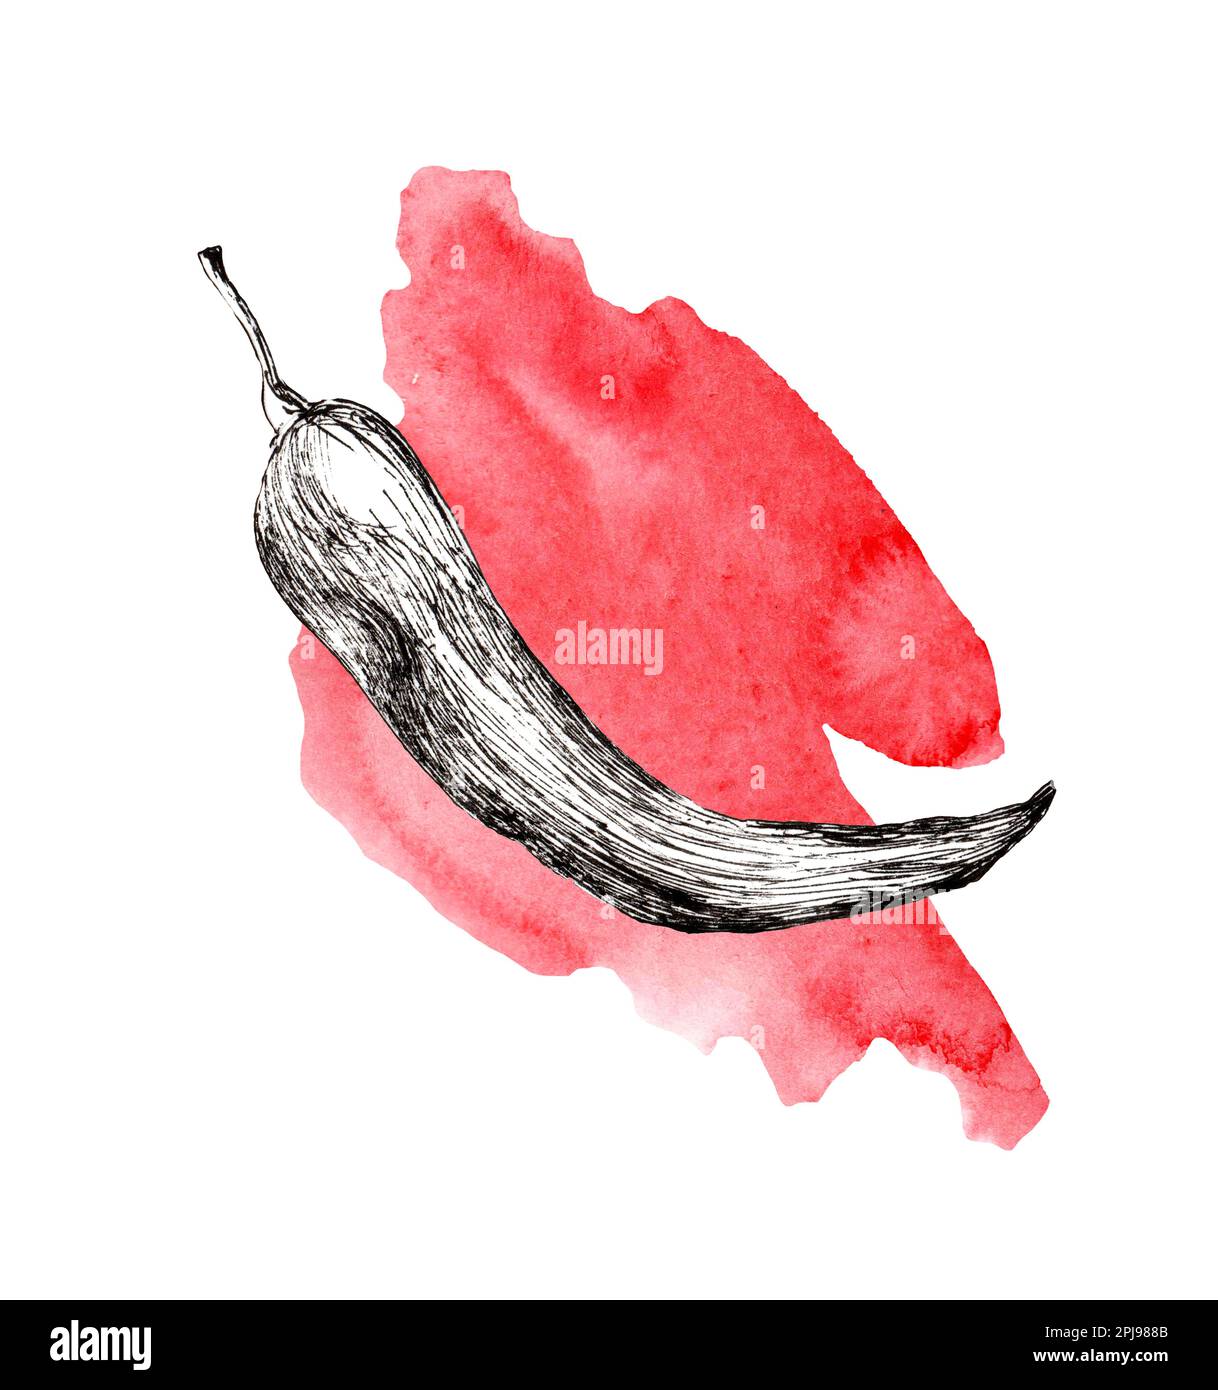 A slice of red paprika. Illustrated in graphics and watercolors. Watercolor spot. Red and black. Line drawing. Stock Photo